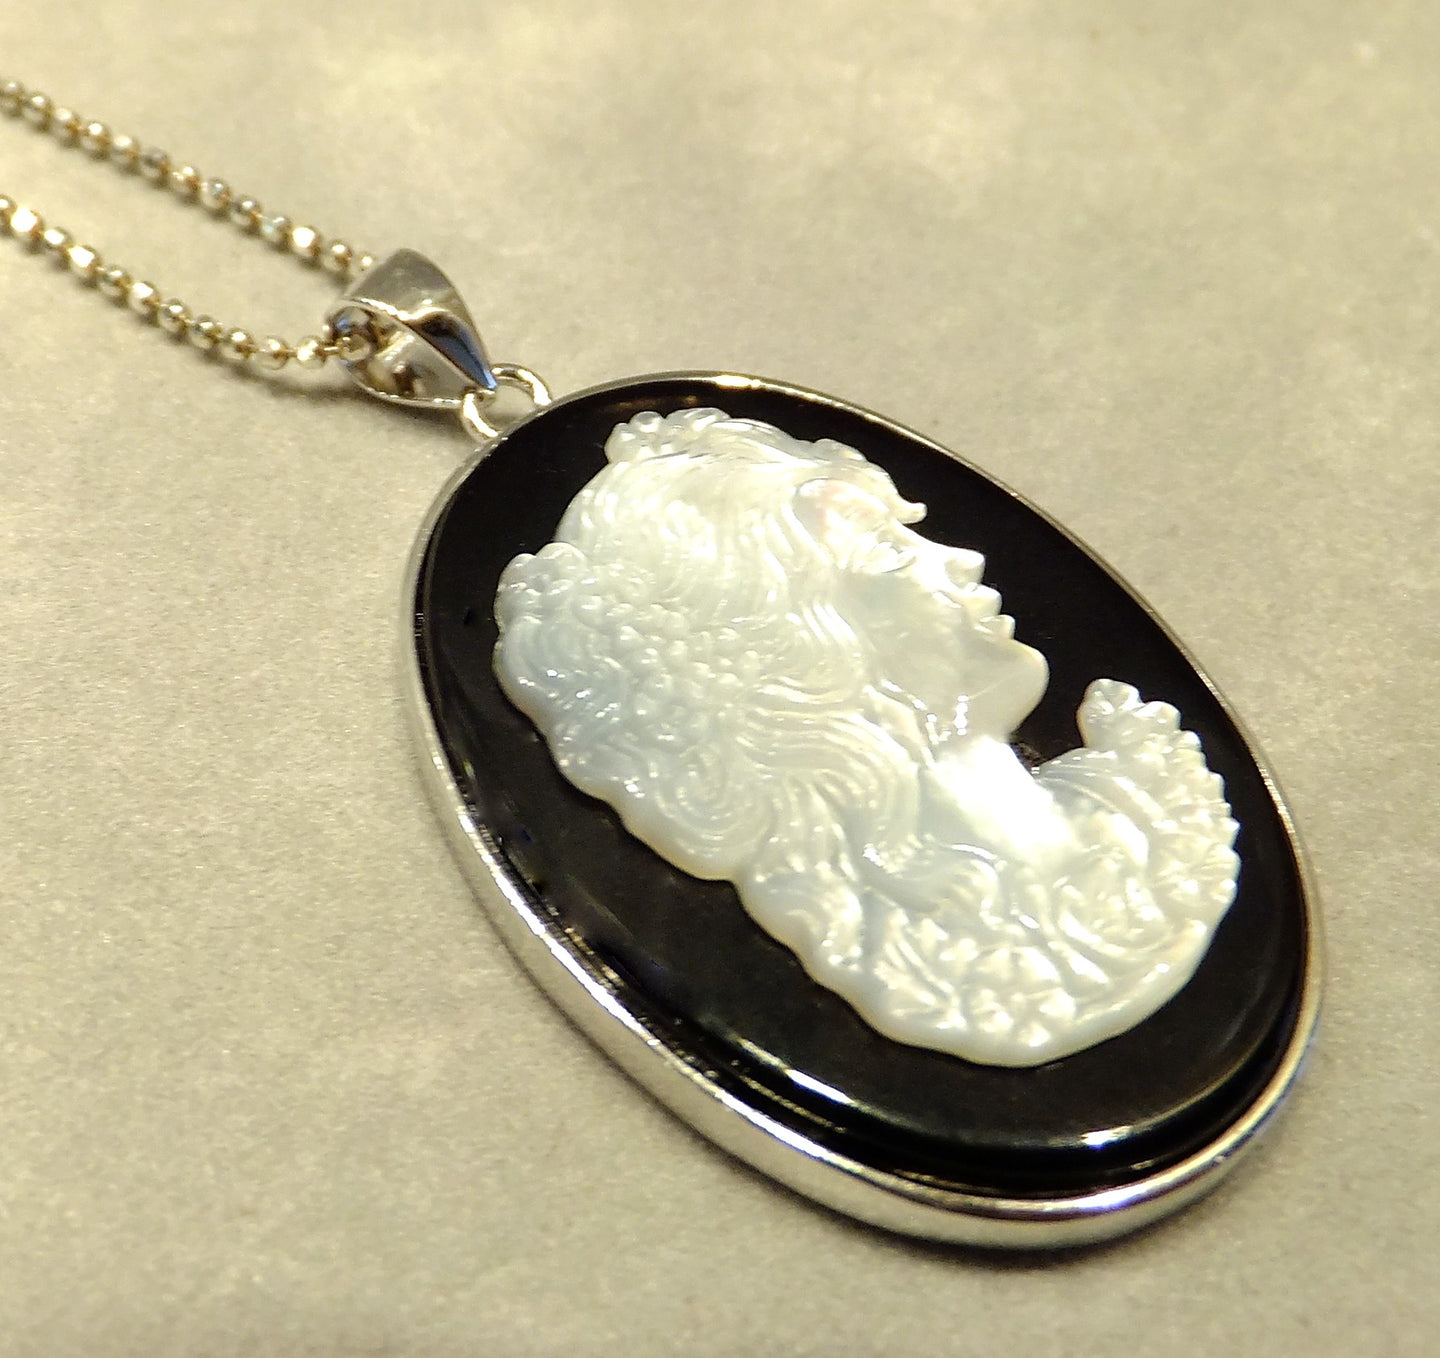 Black and White Cameo pendant necklace